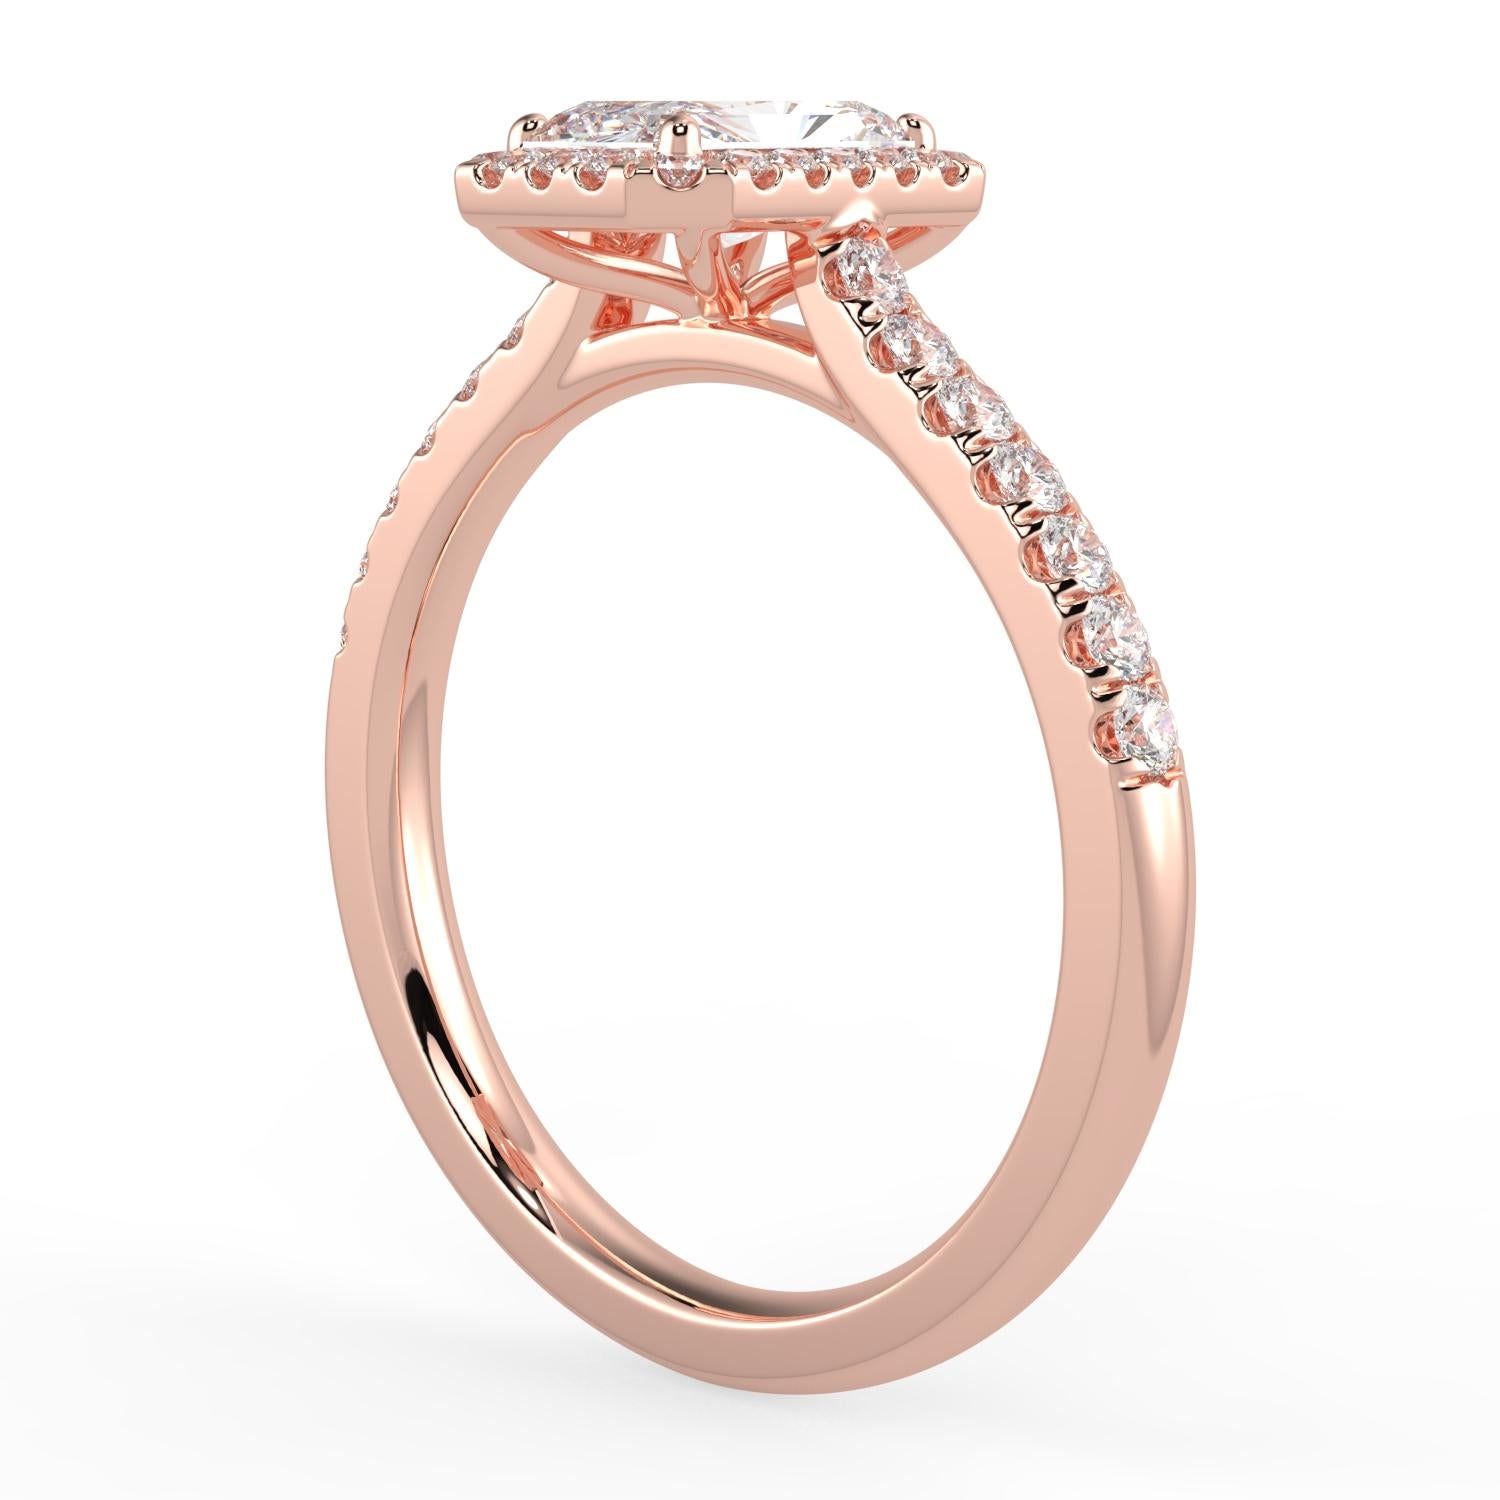 1ct Natural Diamond G-H Color SI Clarity Perfect Design Shape Halo Fashion Stunning Promise Ring 14K Rose Gold 

Specification:
Brand: Aamiaa
Metal: Rose Gold 
Metal Purity: 14k
Center Diamond Shape: Radiant
Design: Halo
Center Carat Weight: